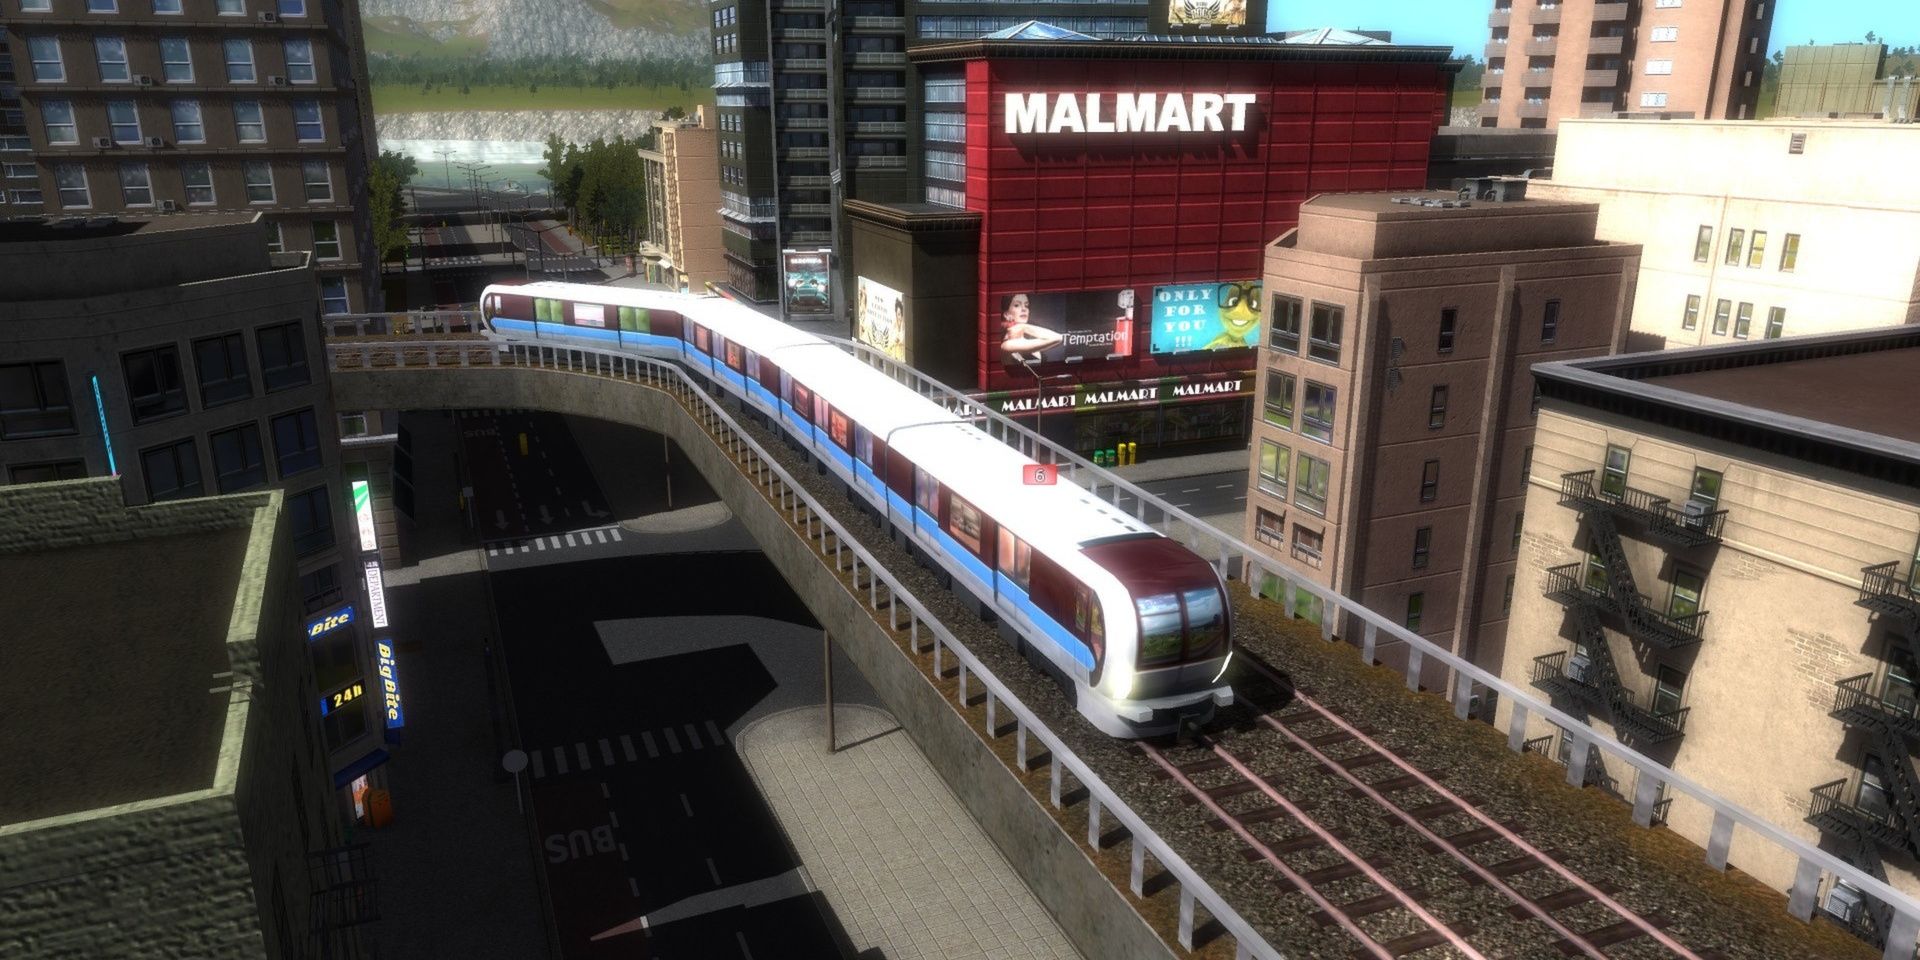 A train on a suspended railway in the middle of a city